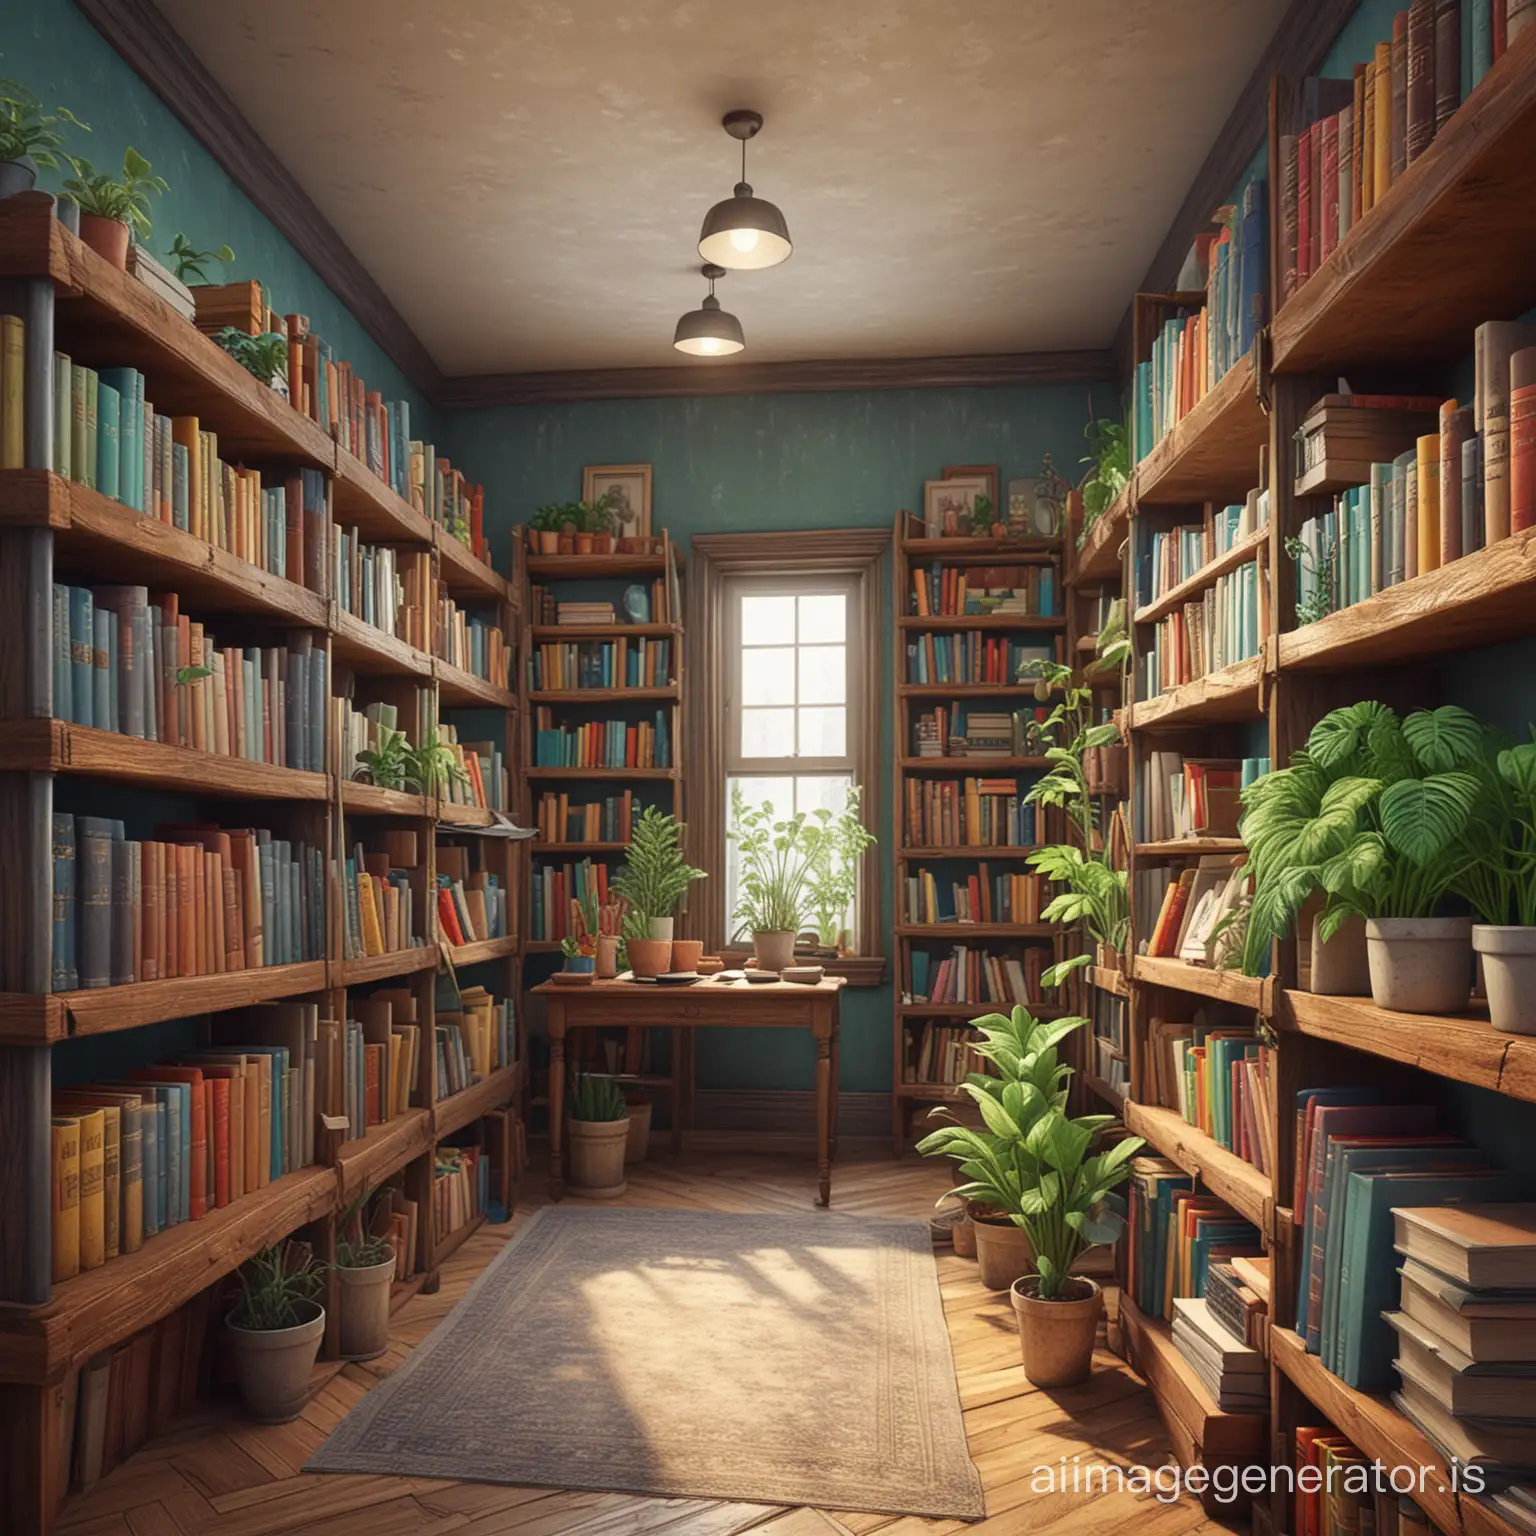 Cozy-Bookstore-Interior-with-Colorful-Shelves-and-Books